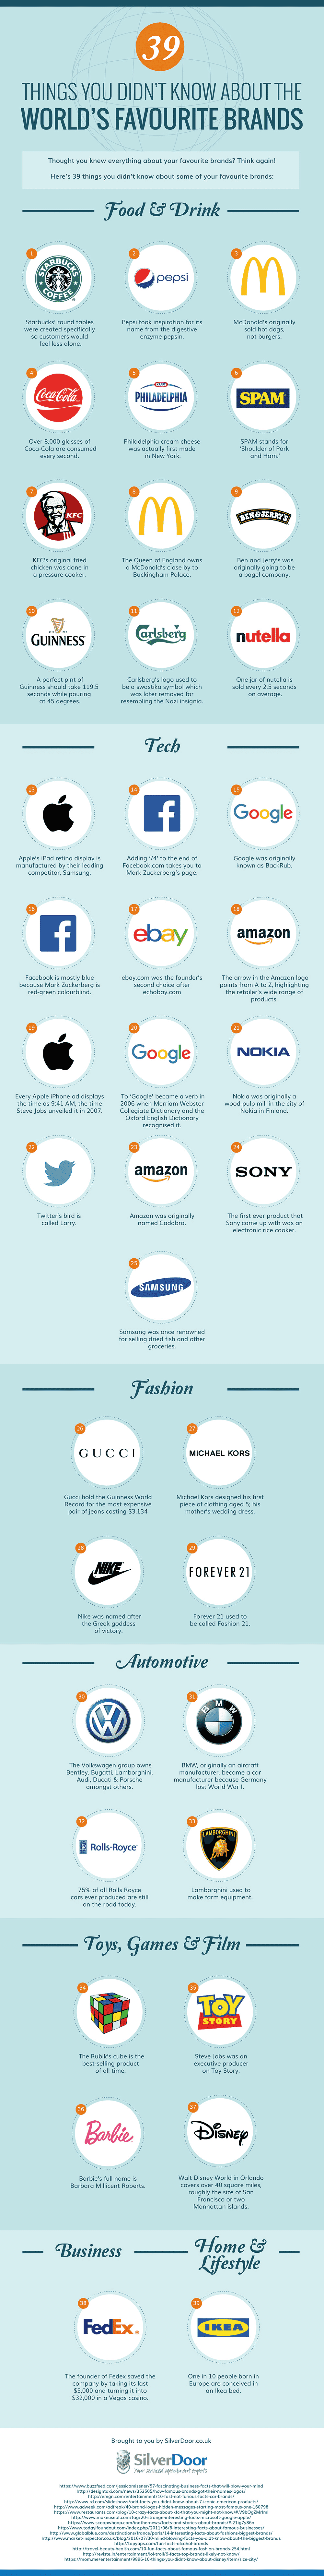 infographic of business facts from your favorite brands